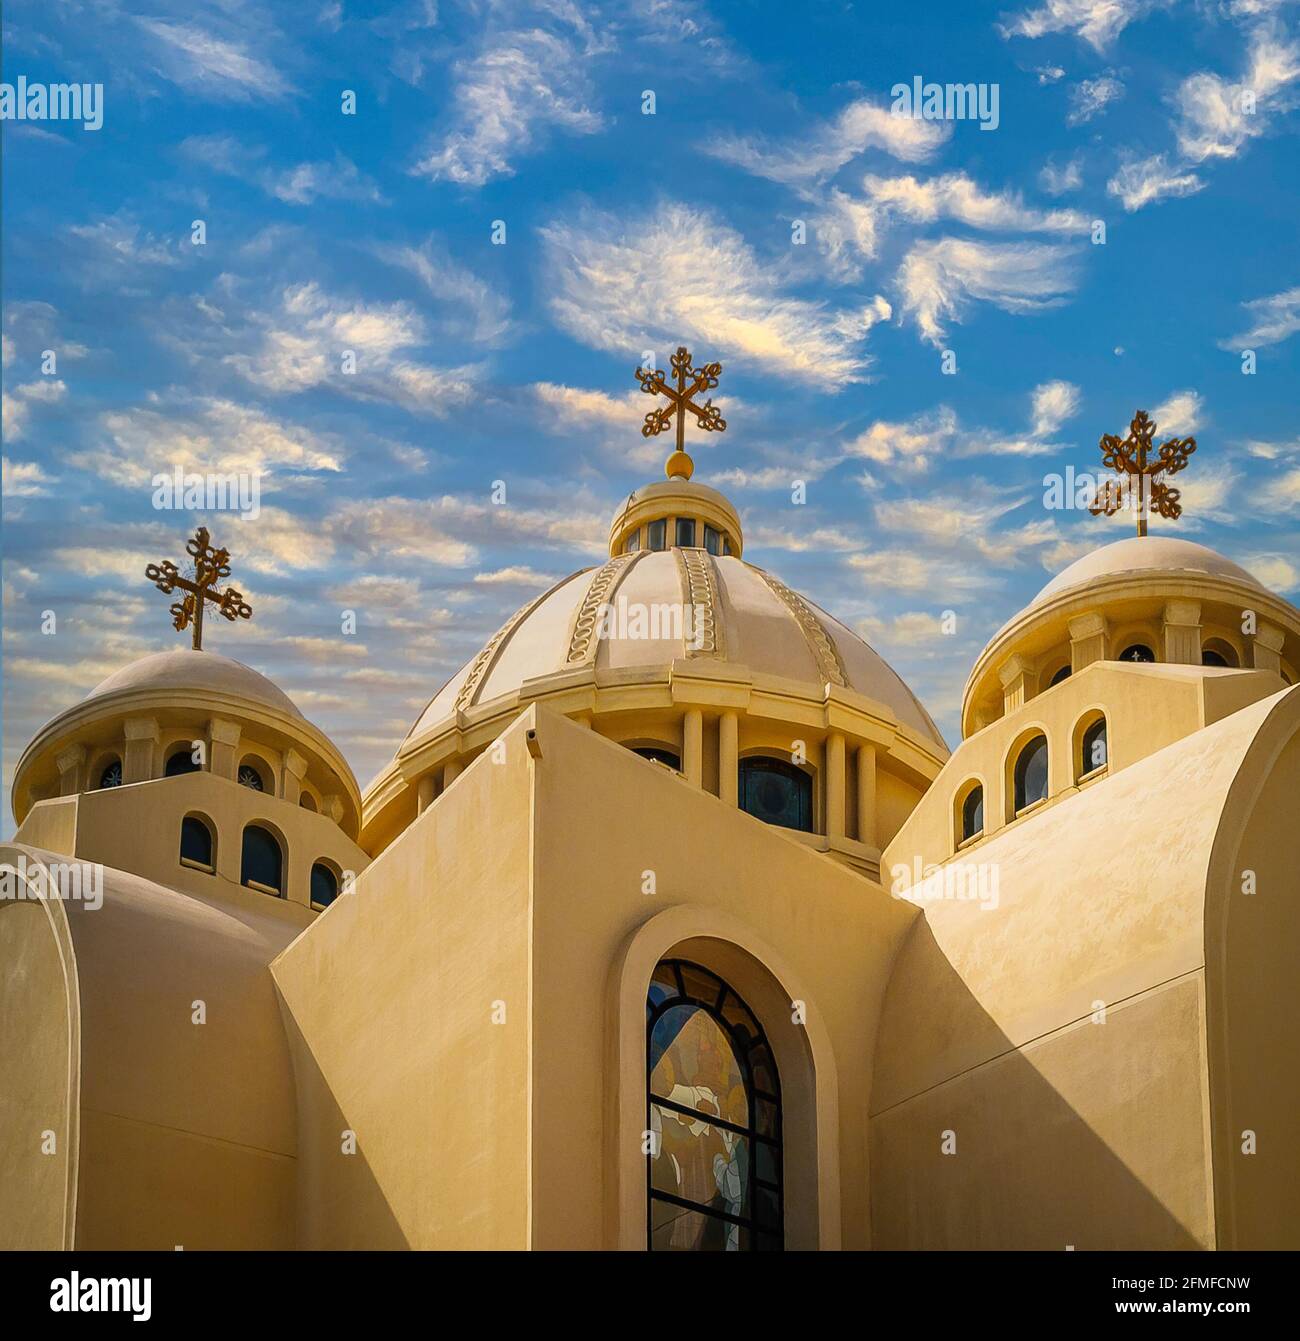 Coptic Orthodox Church of the All Saints in the Sharm el Sheikh, Egypt. Stock Photo